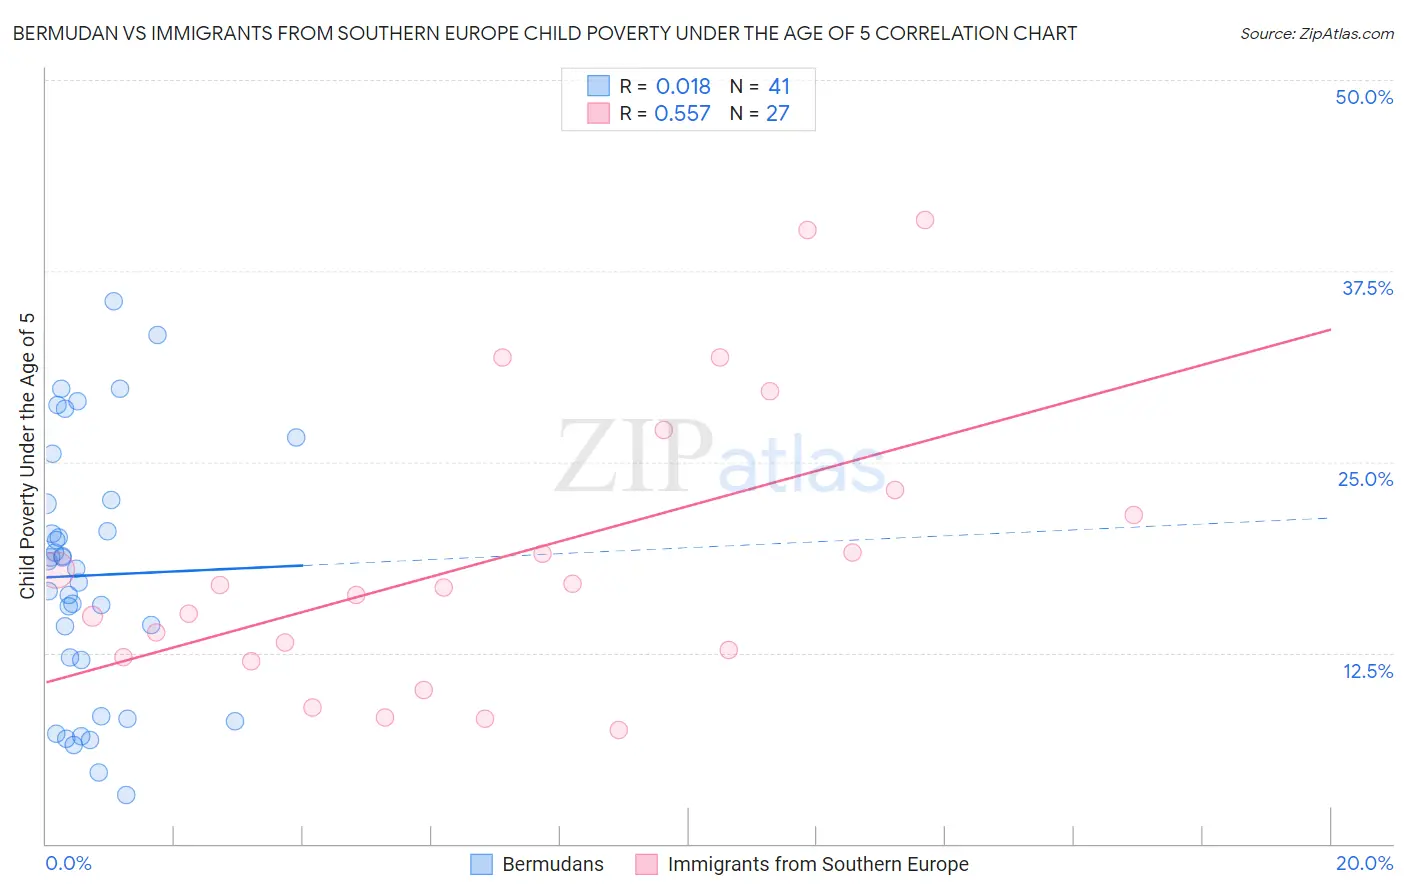 Bermudan vs Immigrants from Southern Europe Child Poverty Under the Age of 5